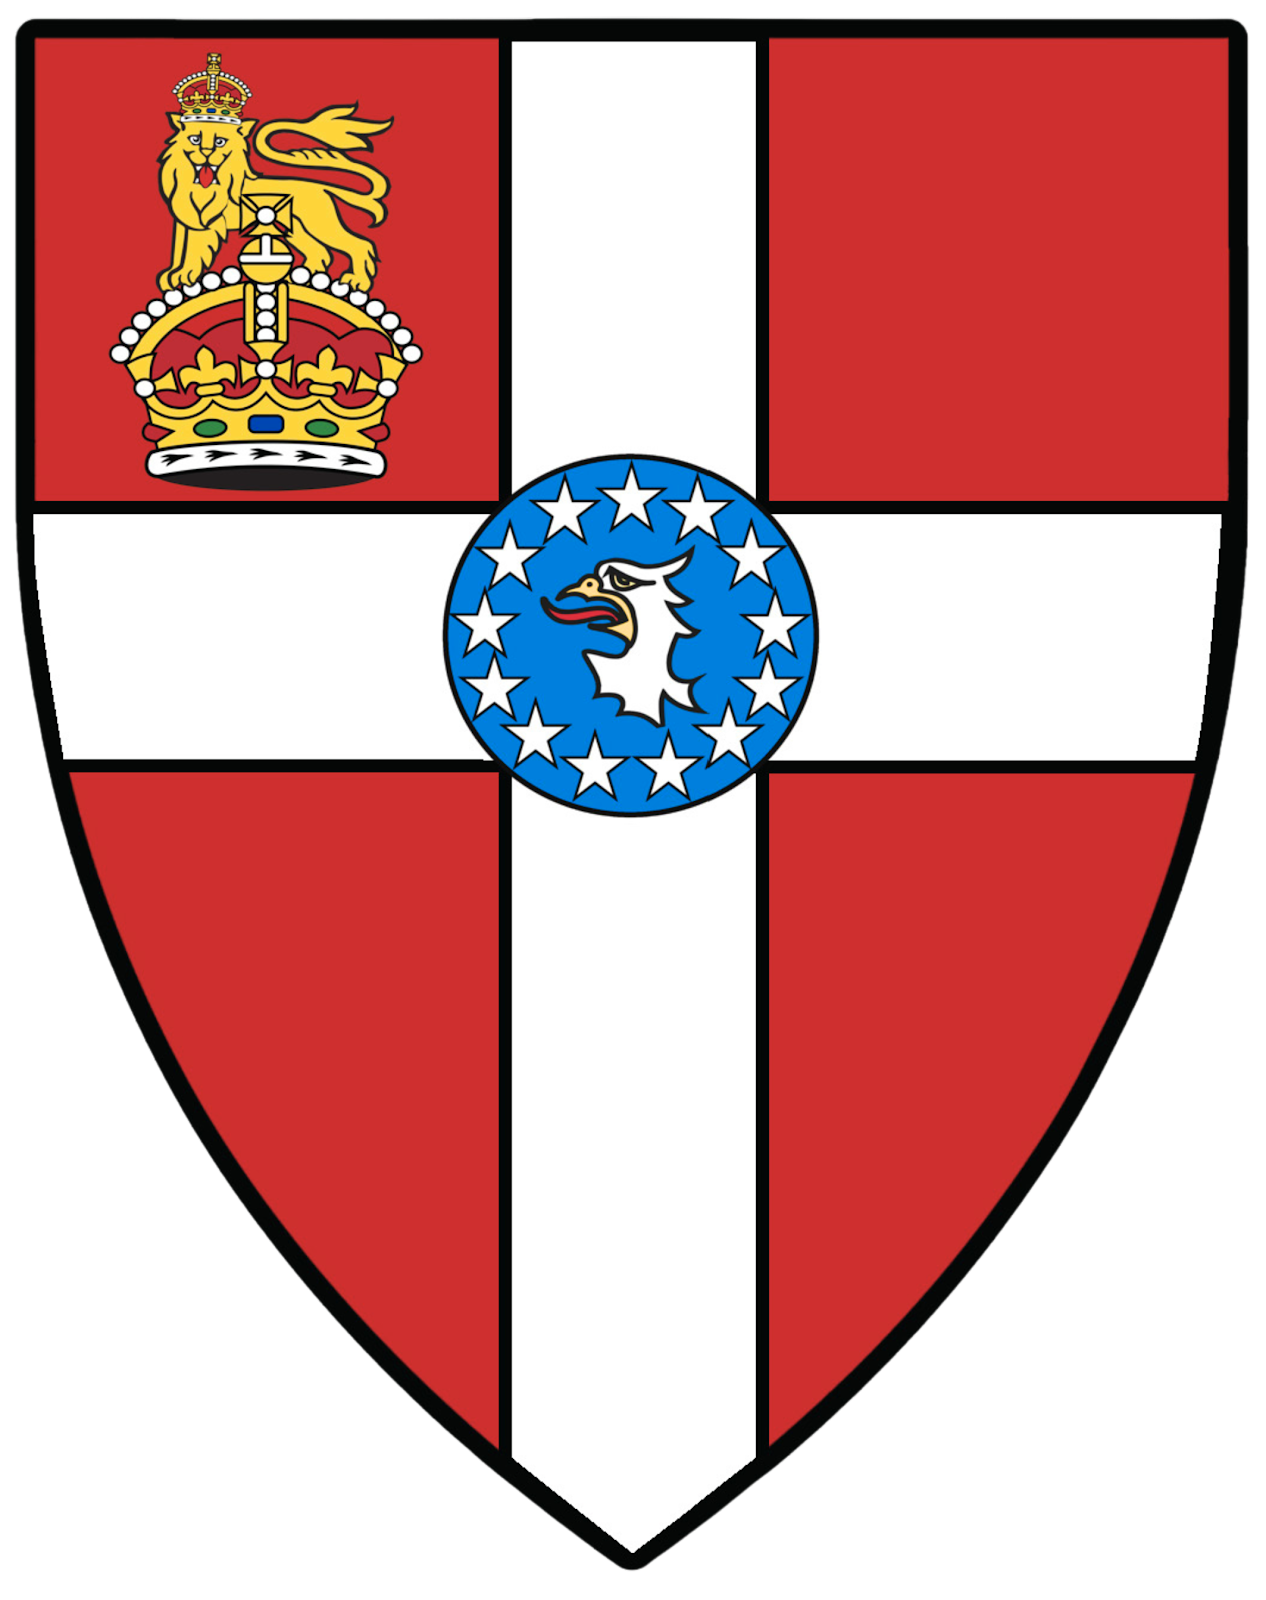 Order of St. John US priory coat of arms crest shield